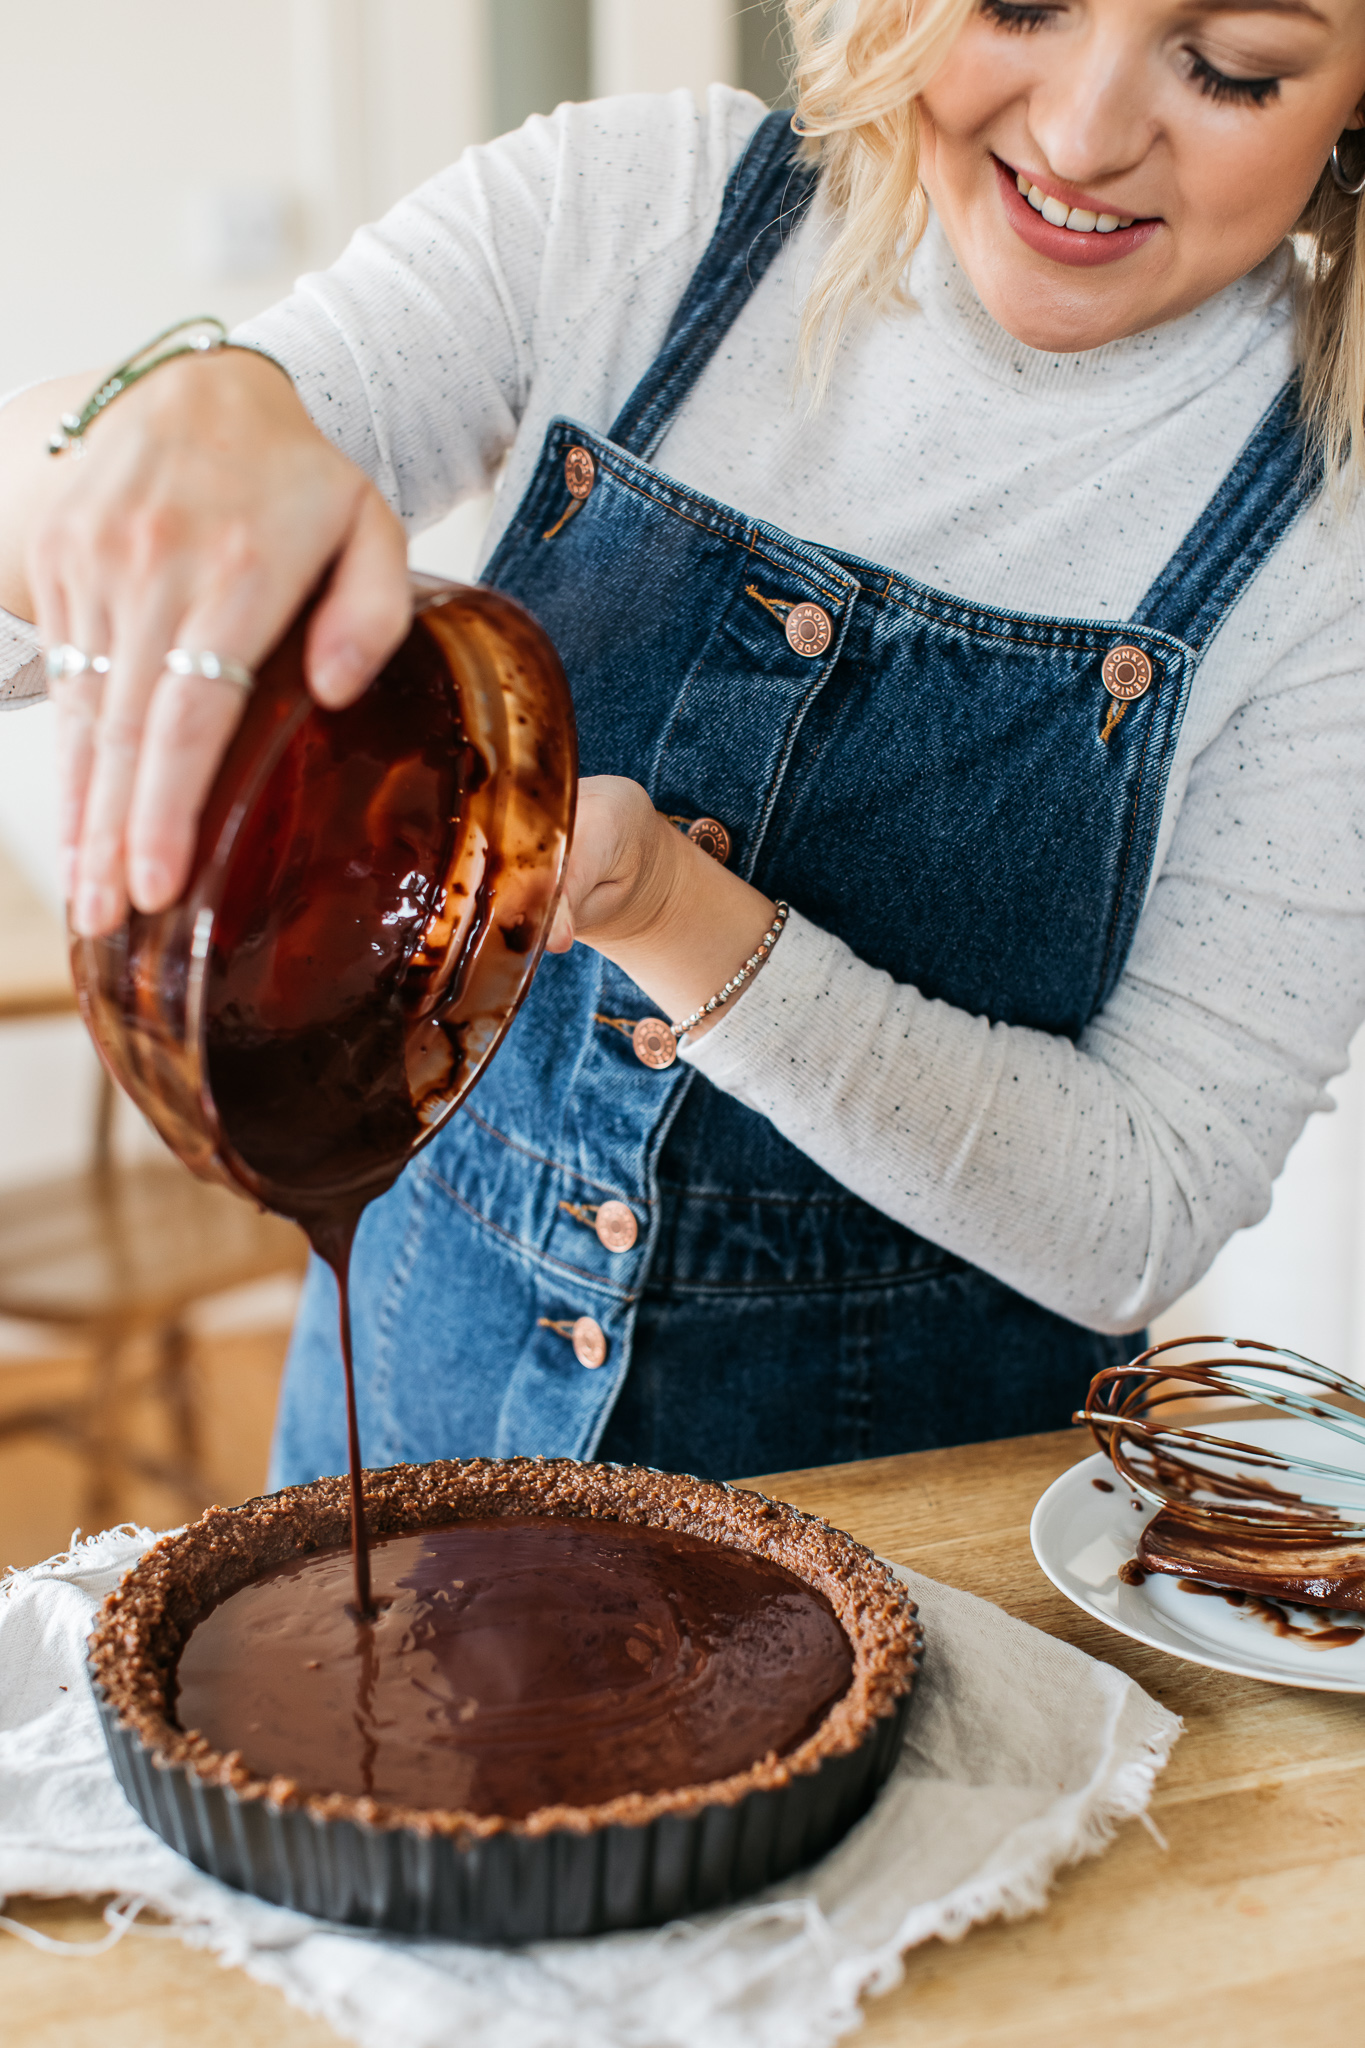 Pouring chocolate into gluten free tart case